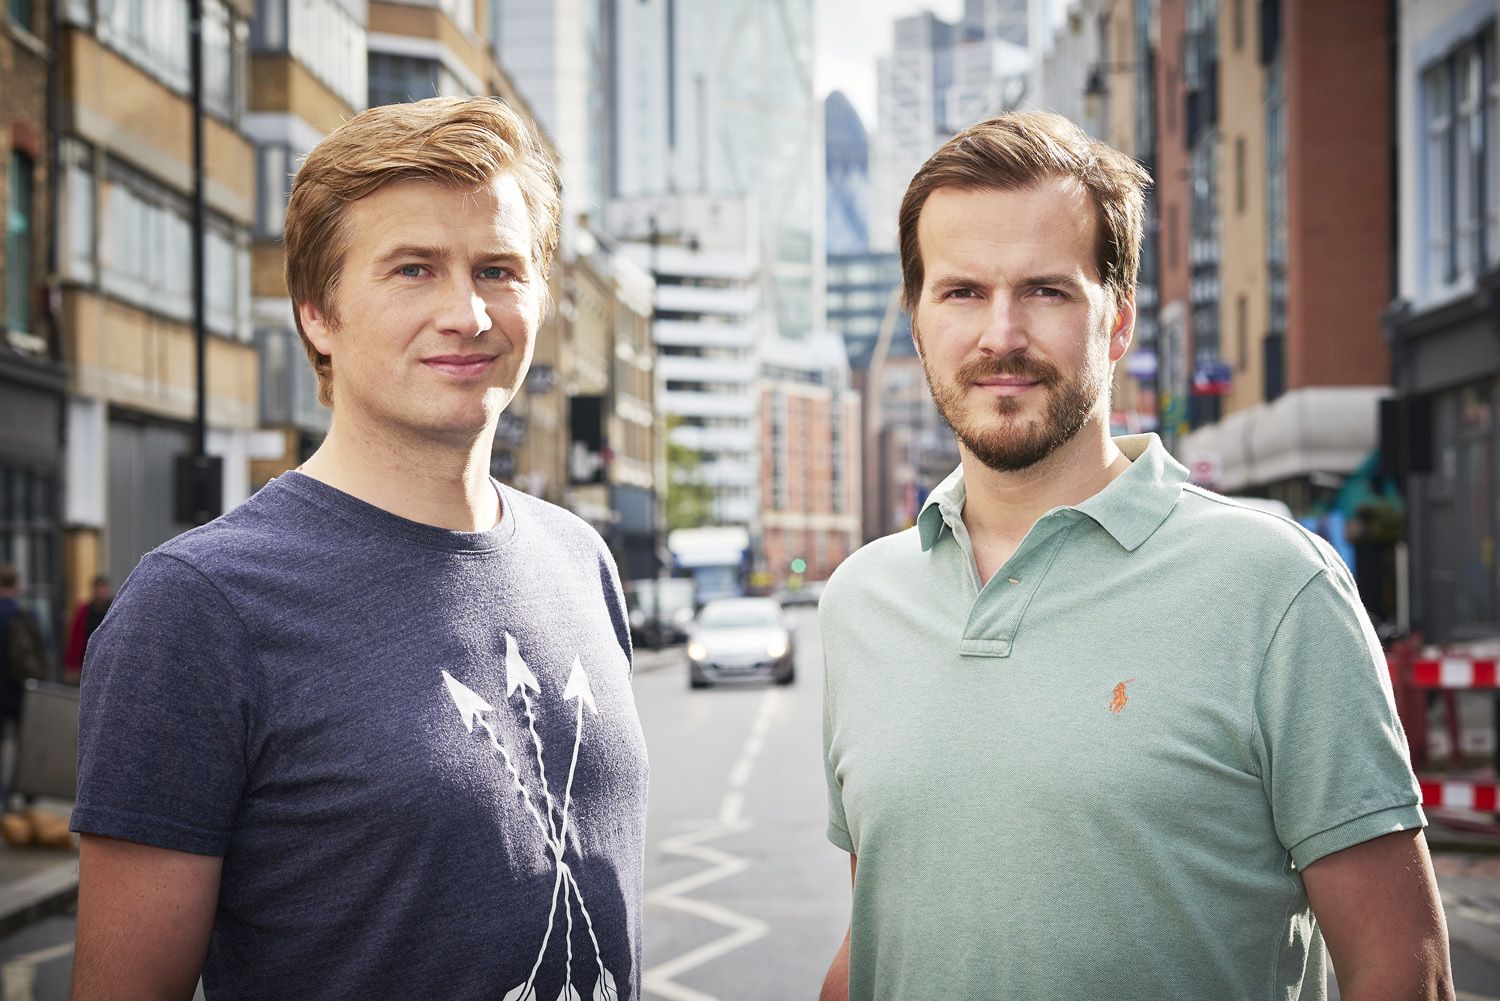 Wise (formerly known as Transferwise) co-founders Kristo Käärmann and Taavet Hinrikus. Backed by Index after their debut pitch at Seedcamp demo day.